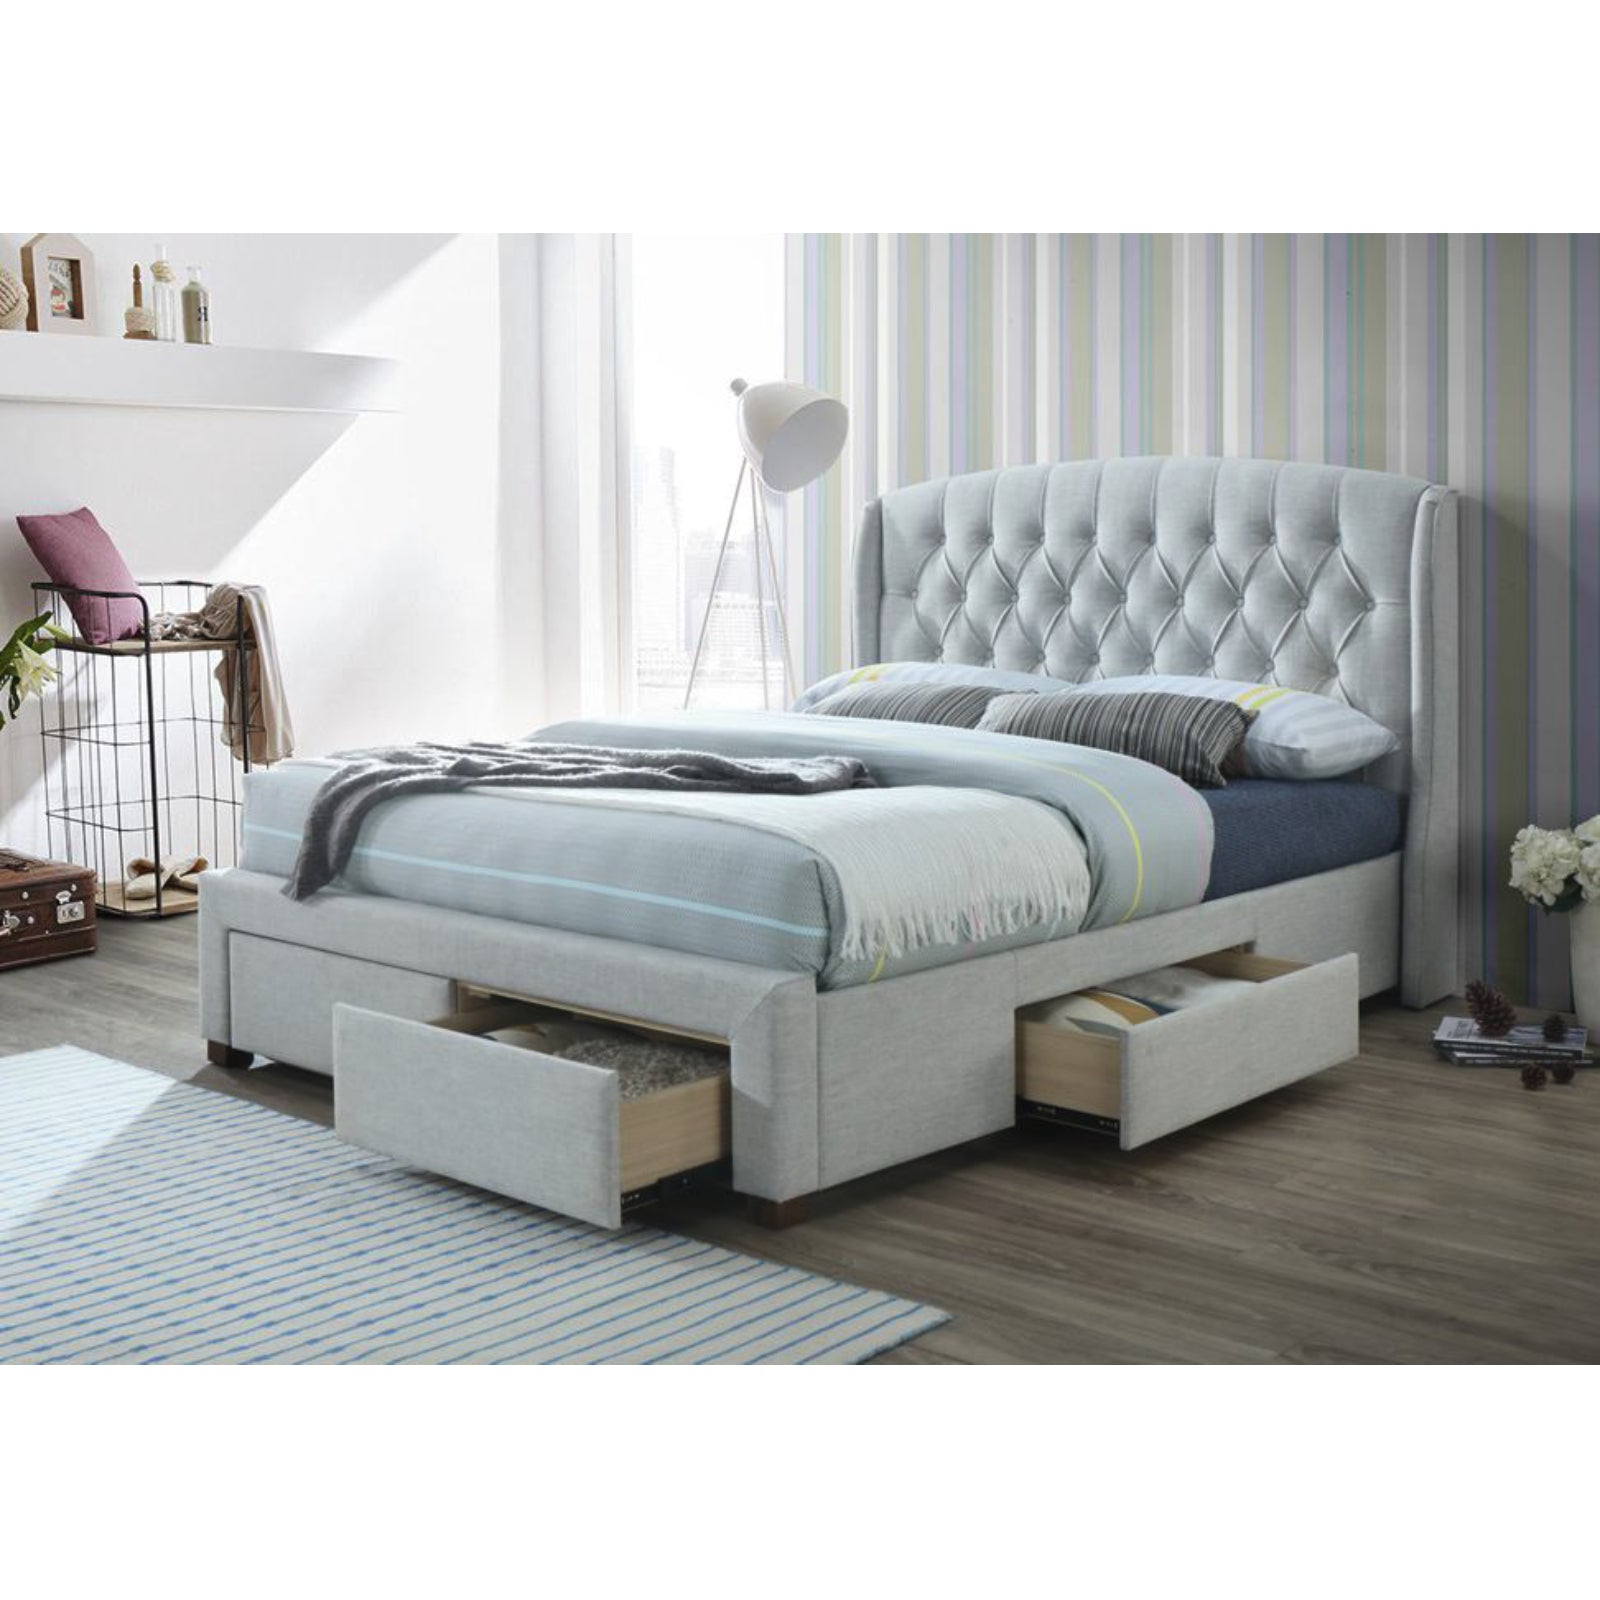 King Size Bed Frame With Headboard and Storage Drawers - Beige